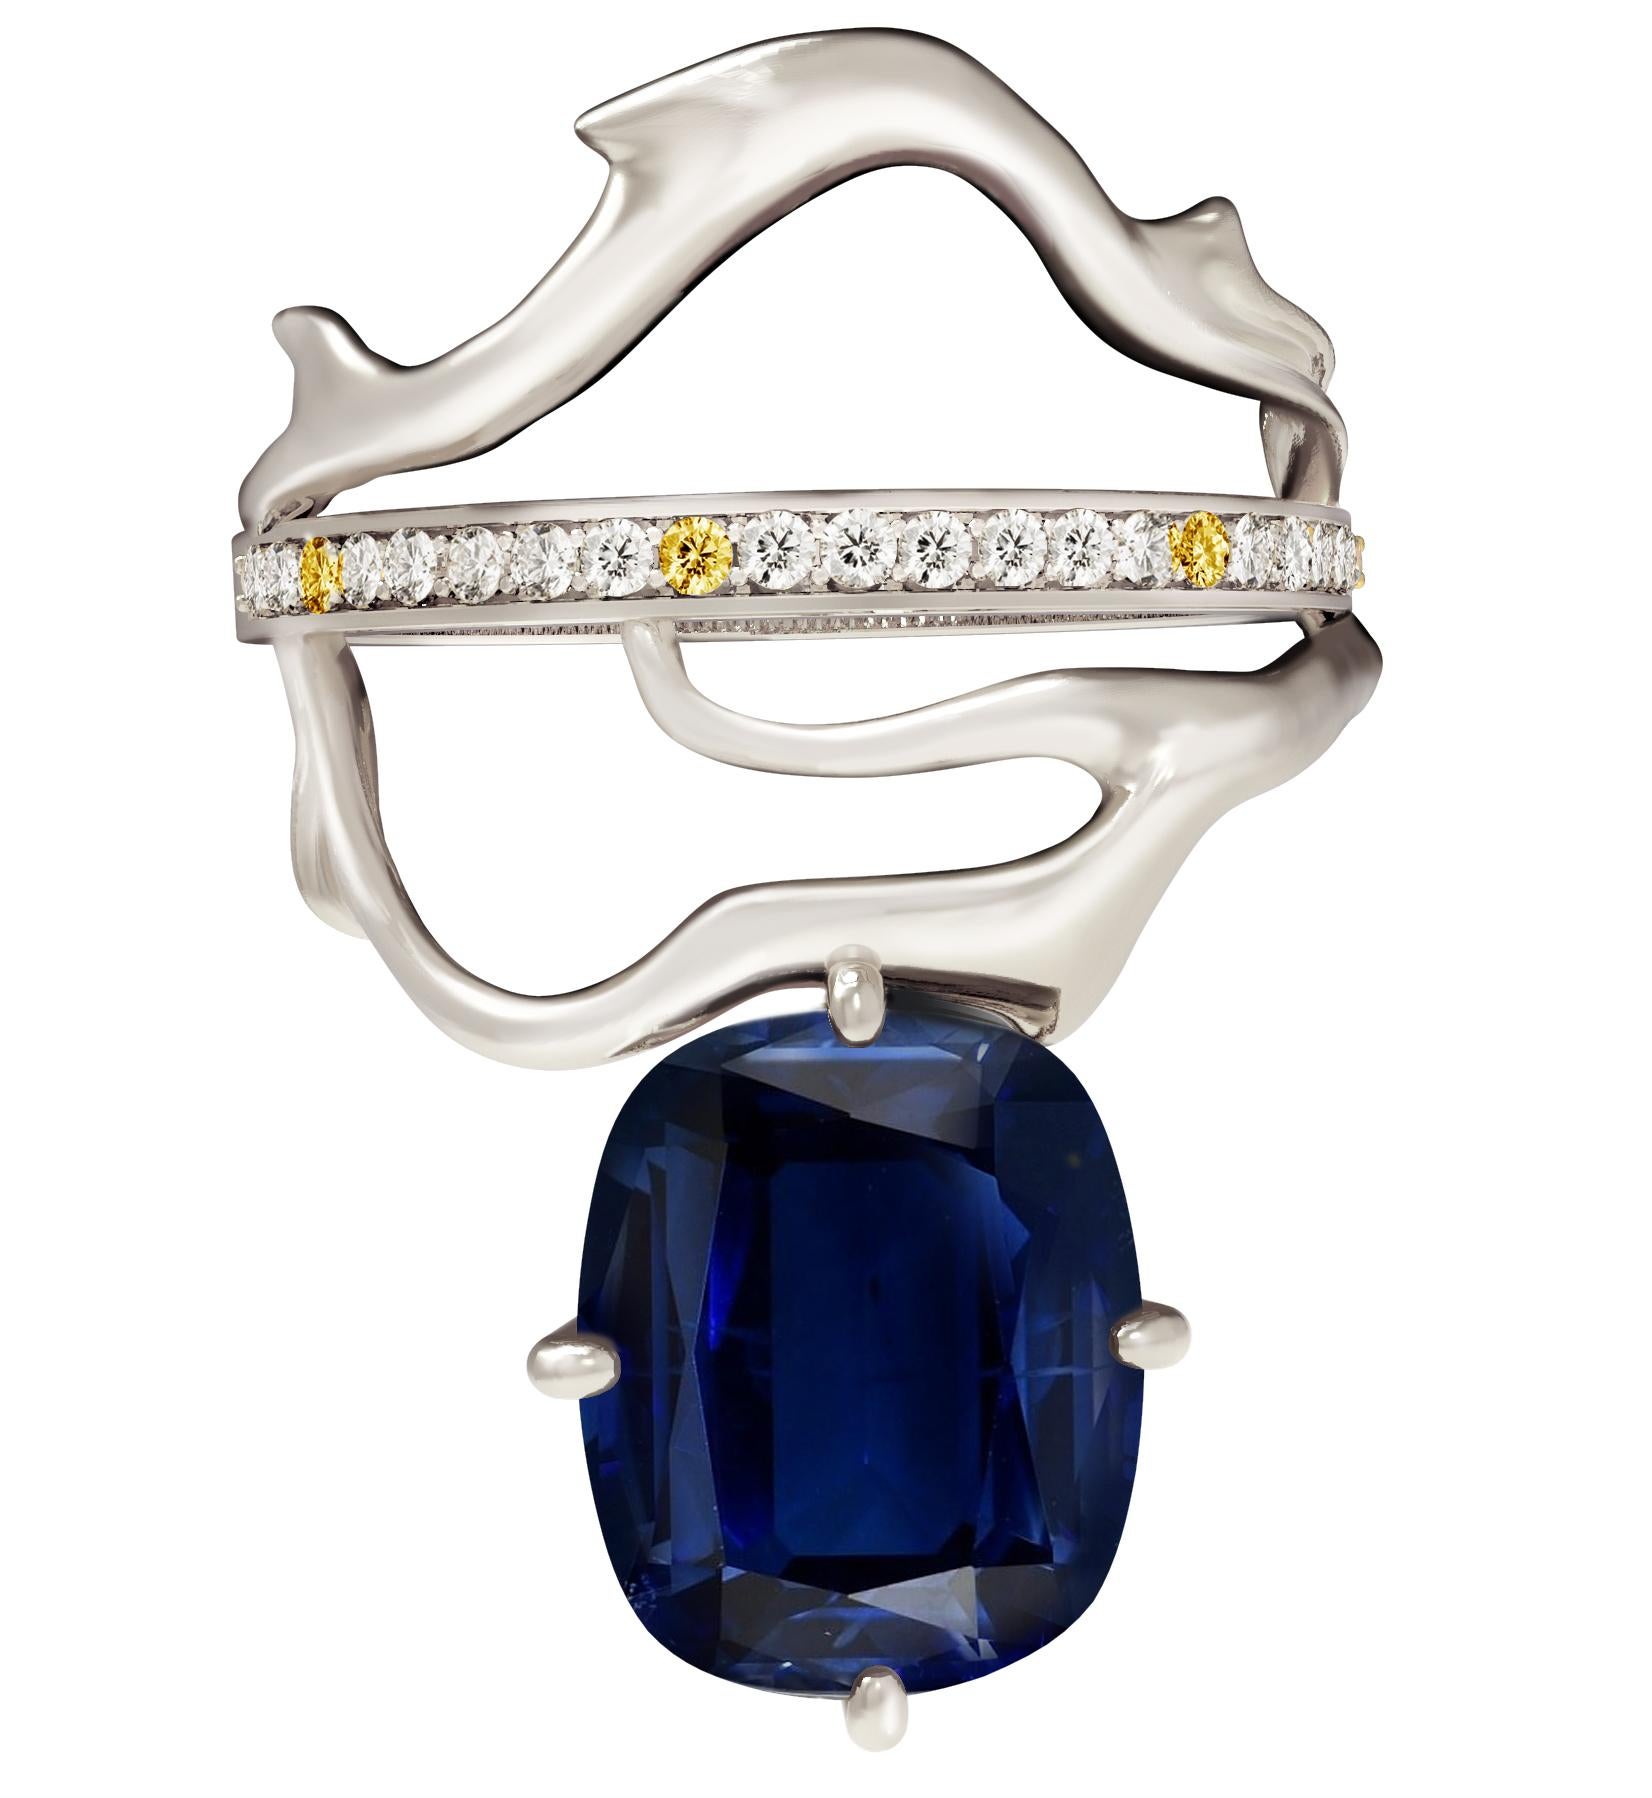 Antique Cushion Cut Eighteen Karat White Gold Tibetan Pendant Necklace with Sapphires and Diamonds For Sale